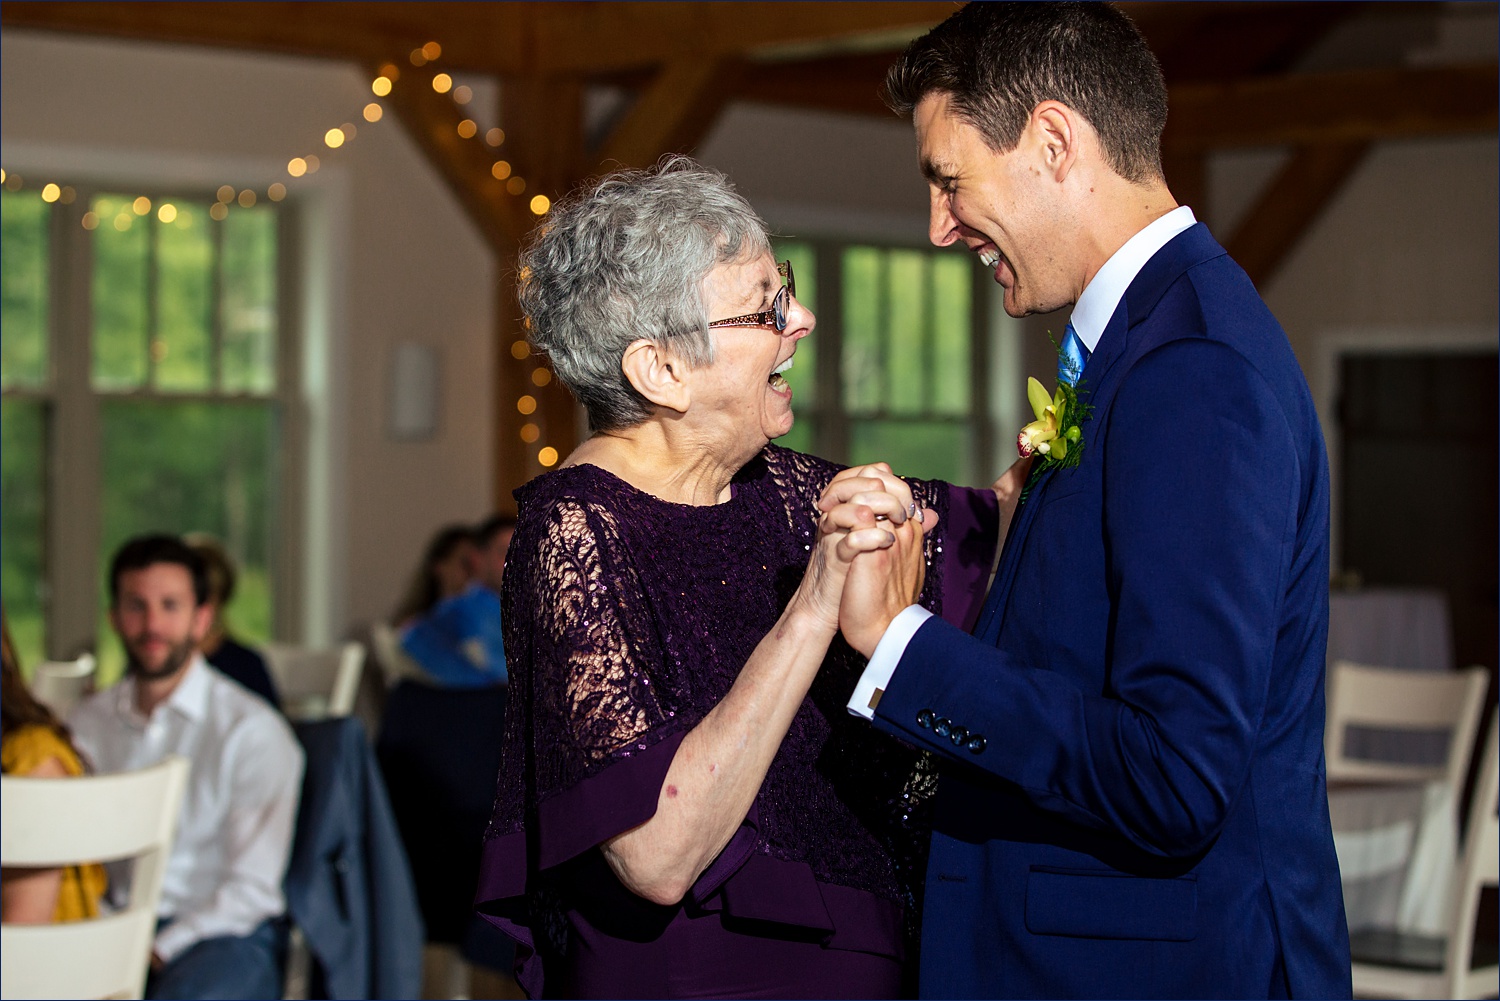 The groom dances with his mom at his NH wedding reception